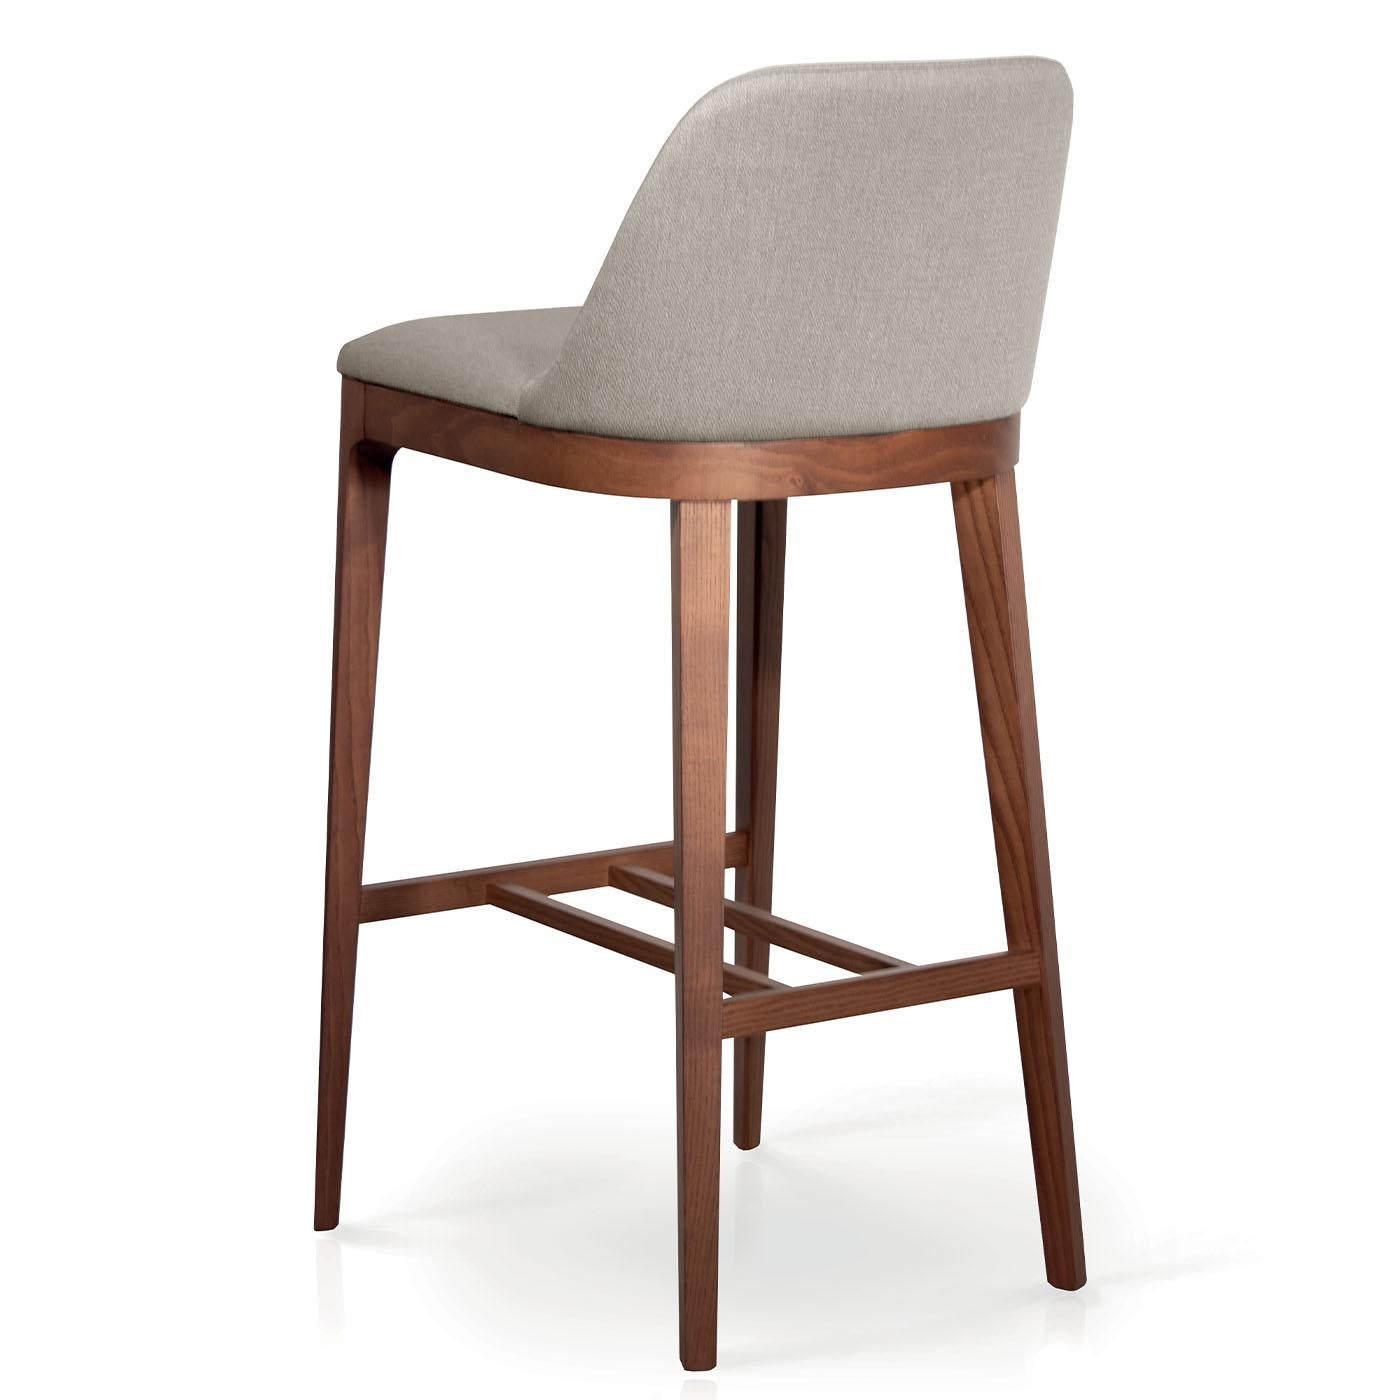 A clean and elegant design distinguished by softly rounded lines, this stool features a solid ash wood frame of simple yet rigorous geometry, supporting a softly padded seat with backrest, minutely covered with leather, faux leather, or fabric from